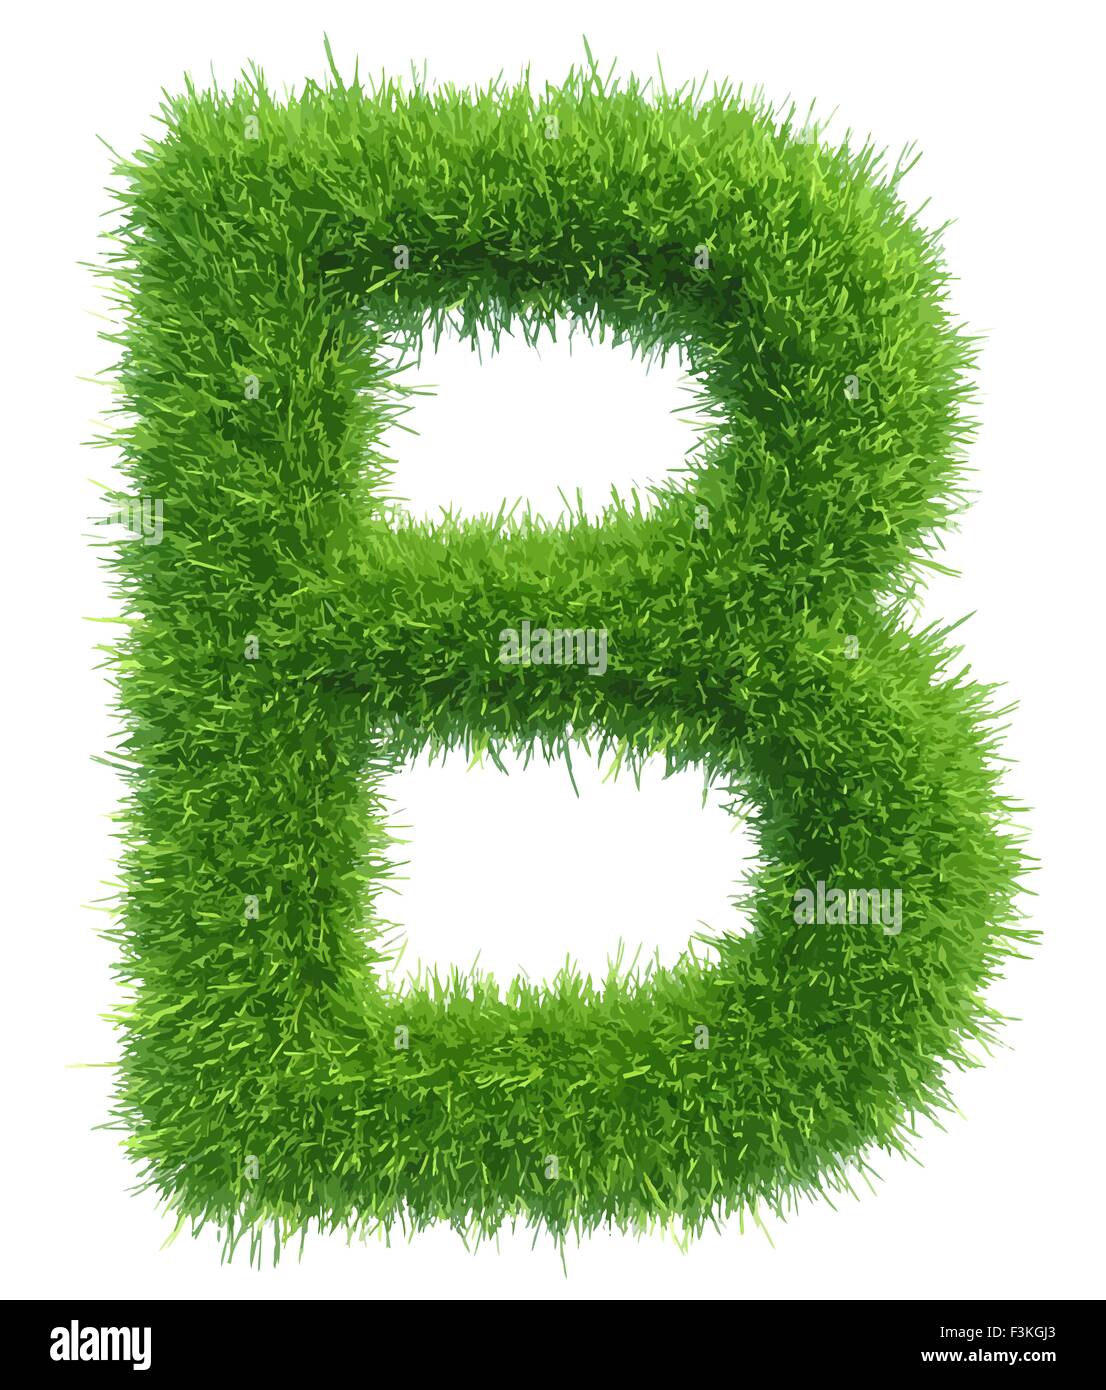 Vector capital letter B from grass on white background Stock Vector